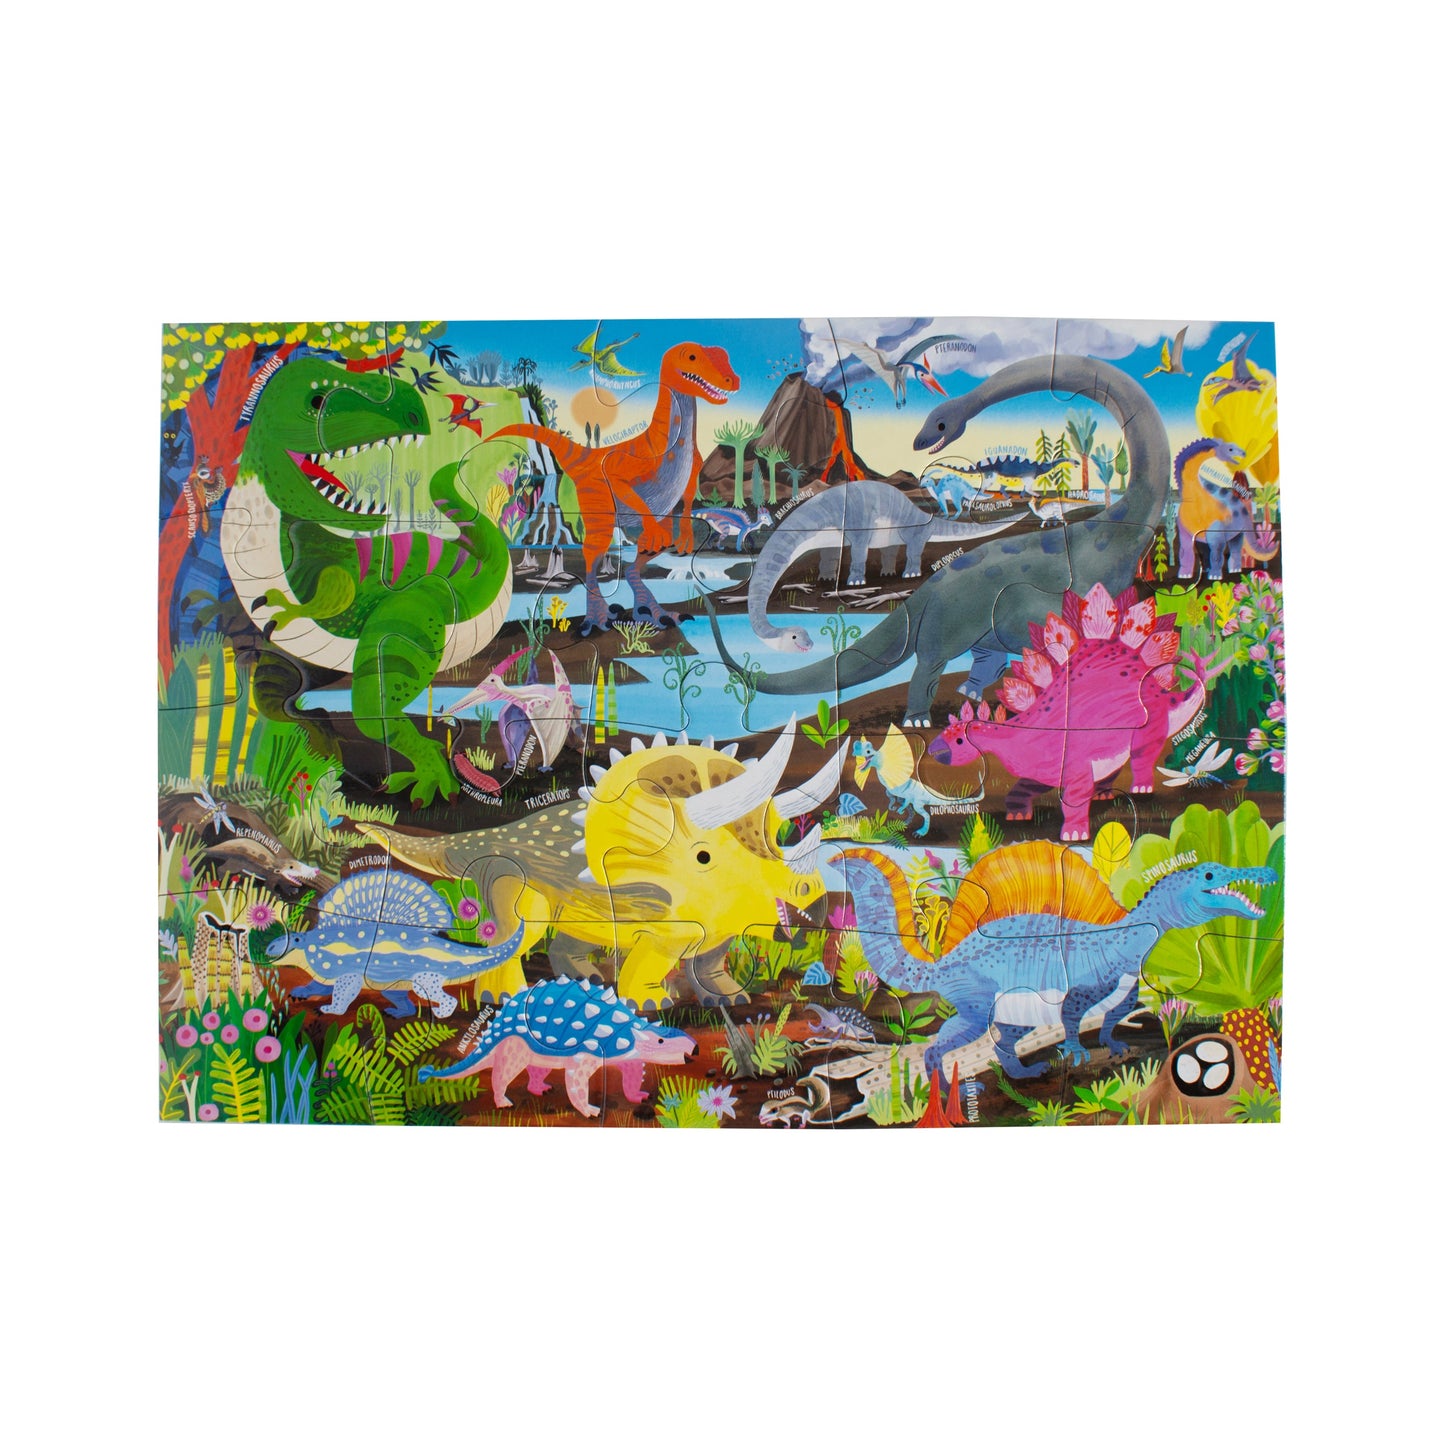 Dinosaur Land 20 Large Pieces Jigsaw Puzzle eeBoo Gifts for Pre School Kids 3+ Future Paleontologist